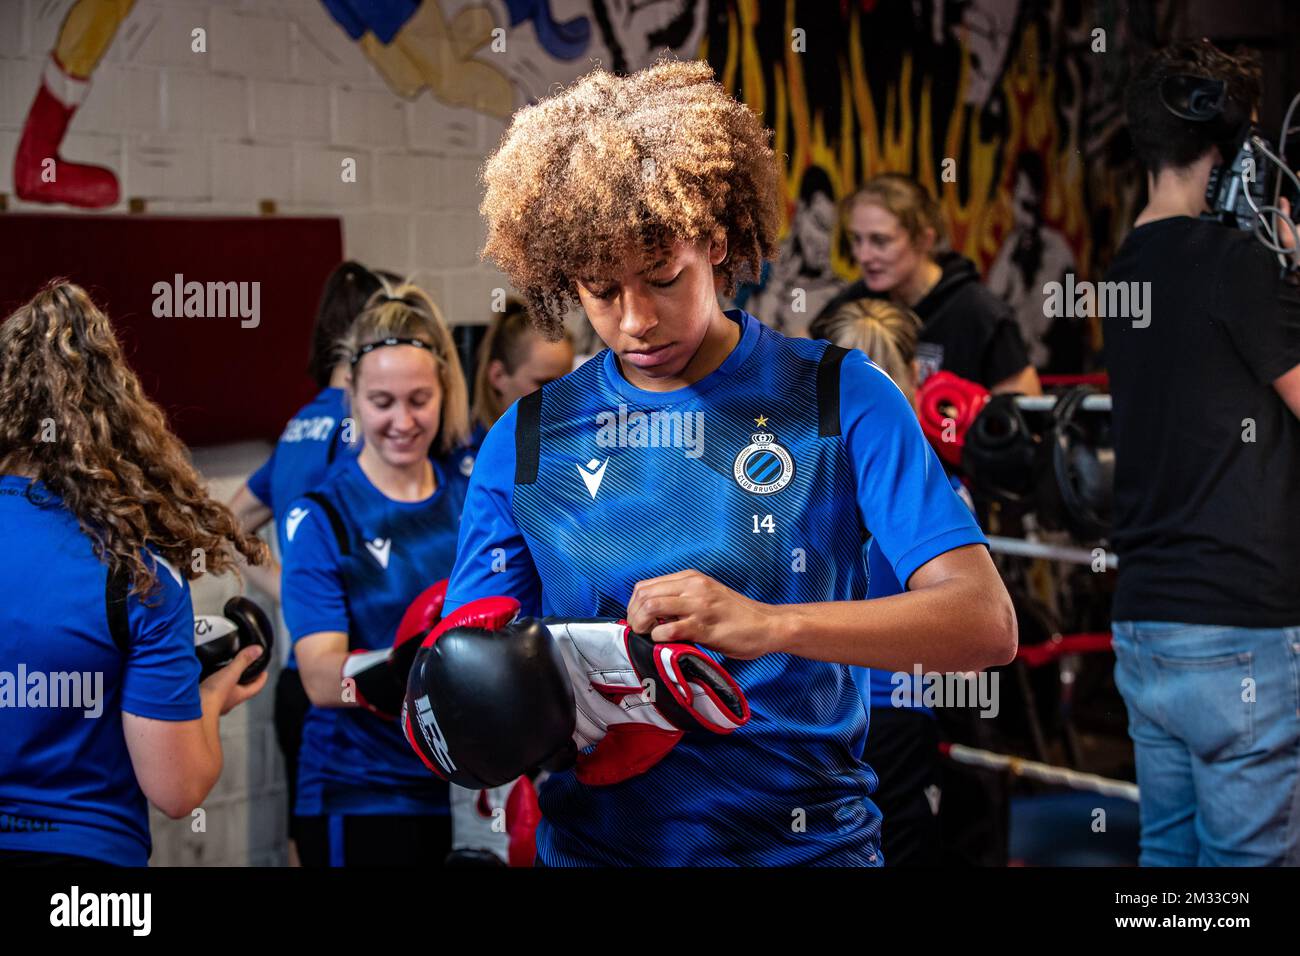 Club YLA's Tracy Furo pictured during a boxing training session for the Club Brugge Dames women's soccer team, at the boxing gym of Belgian Persoon in Lichtervelde, Friday 18 September 2020. BELGA PHOTO KURT DESPLENTER Stock Photo